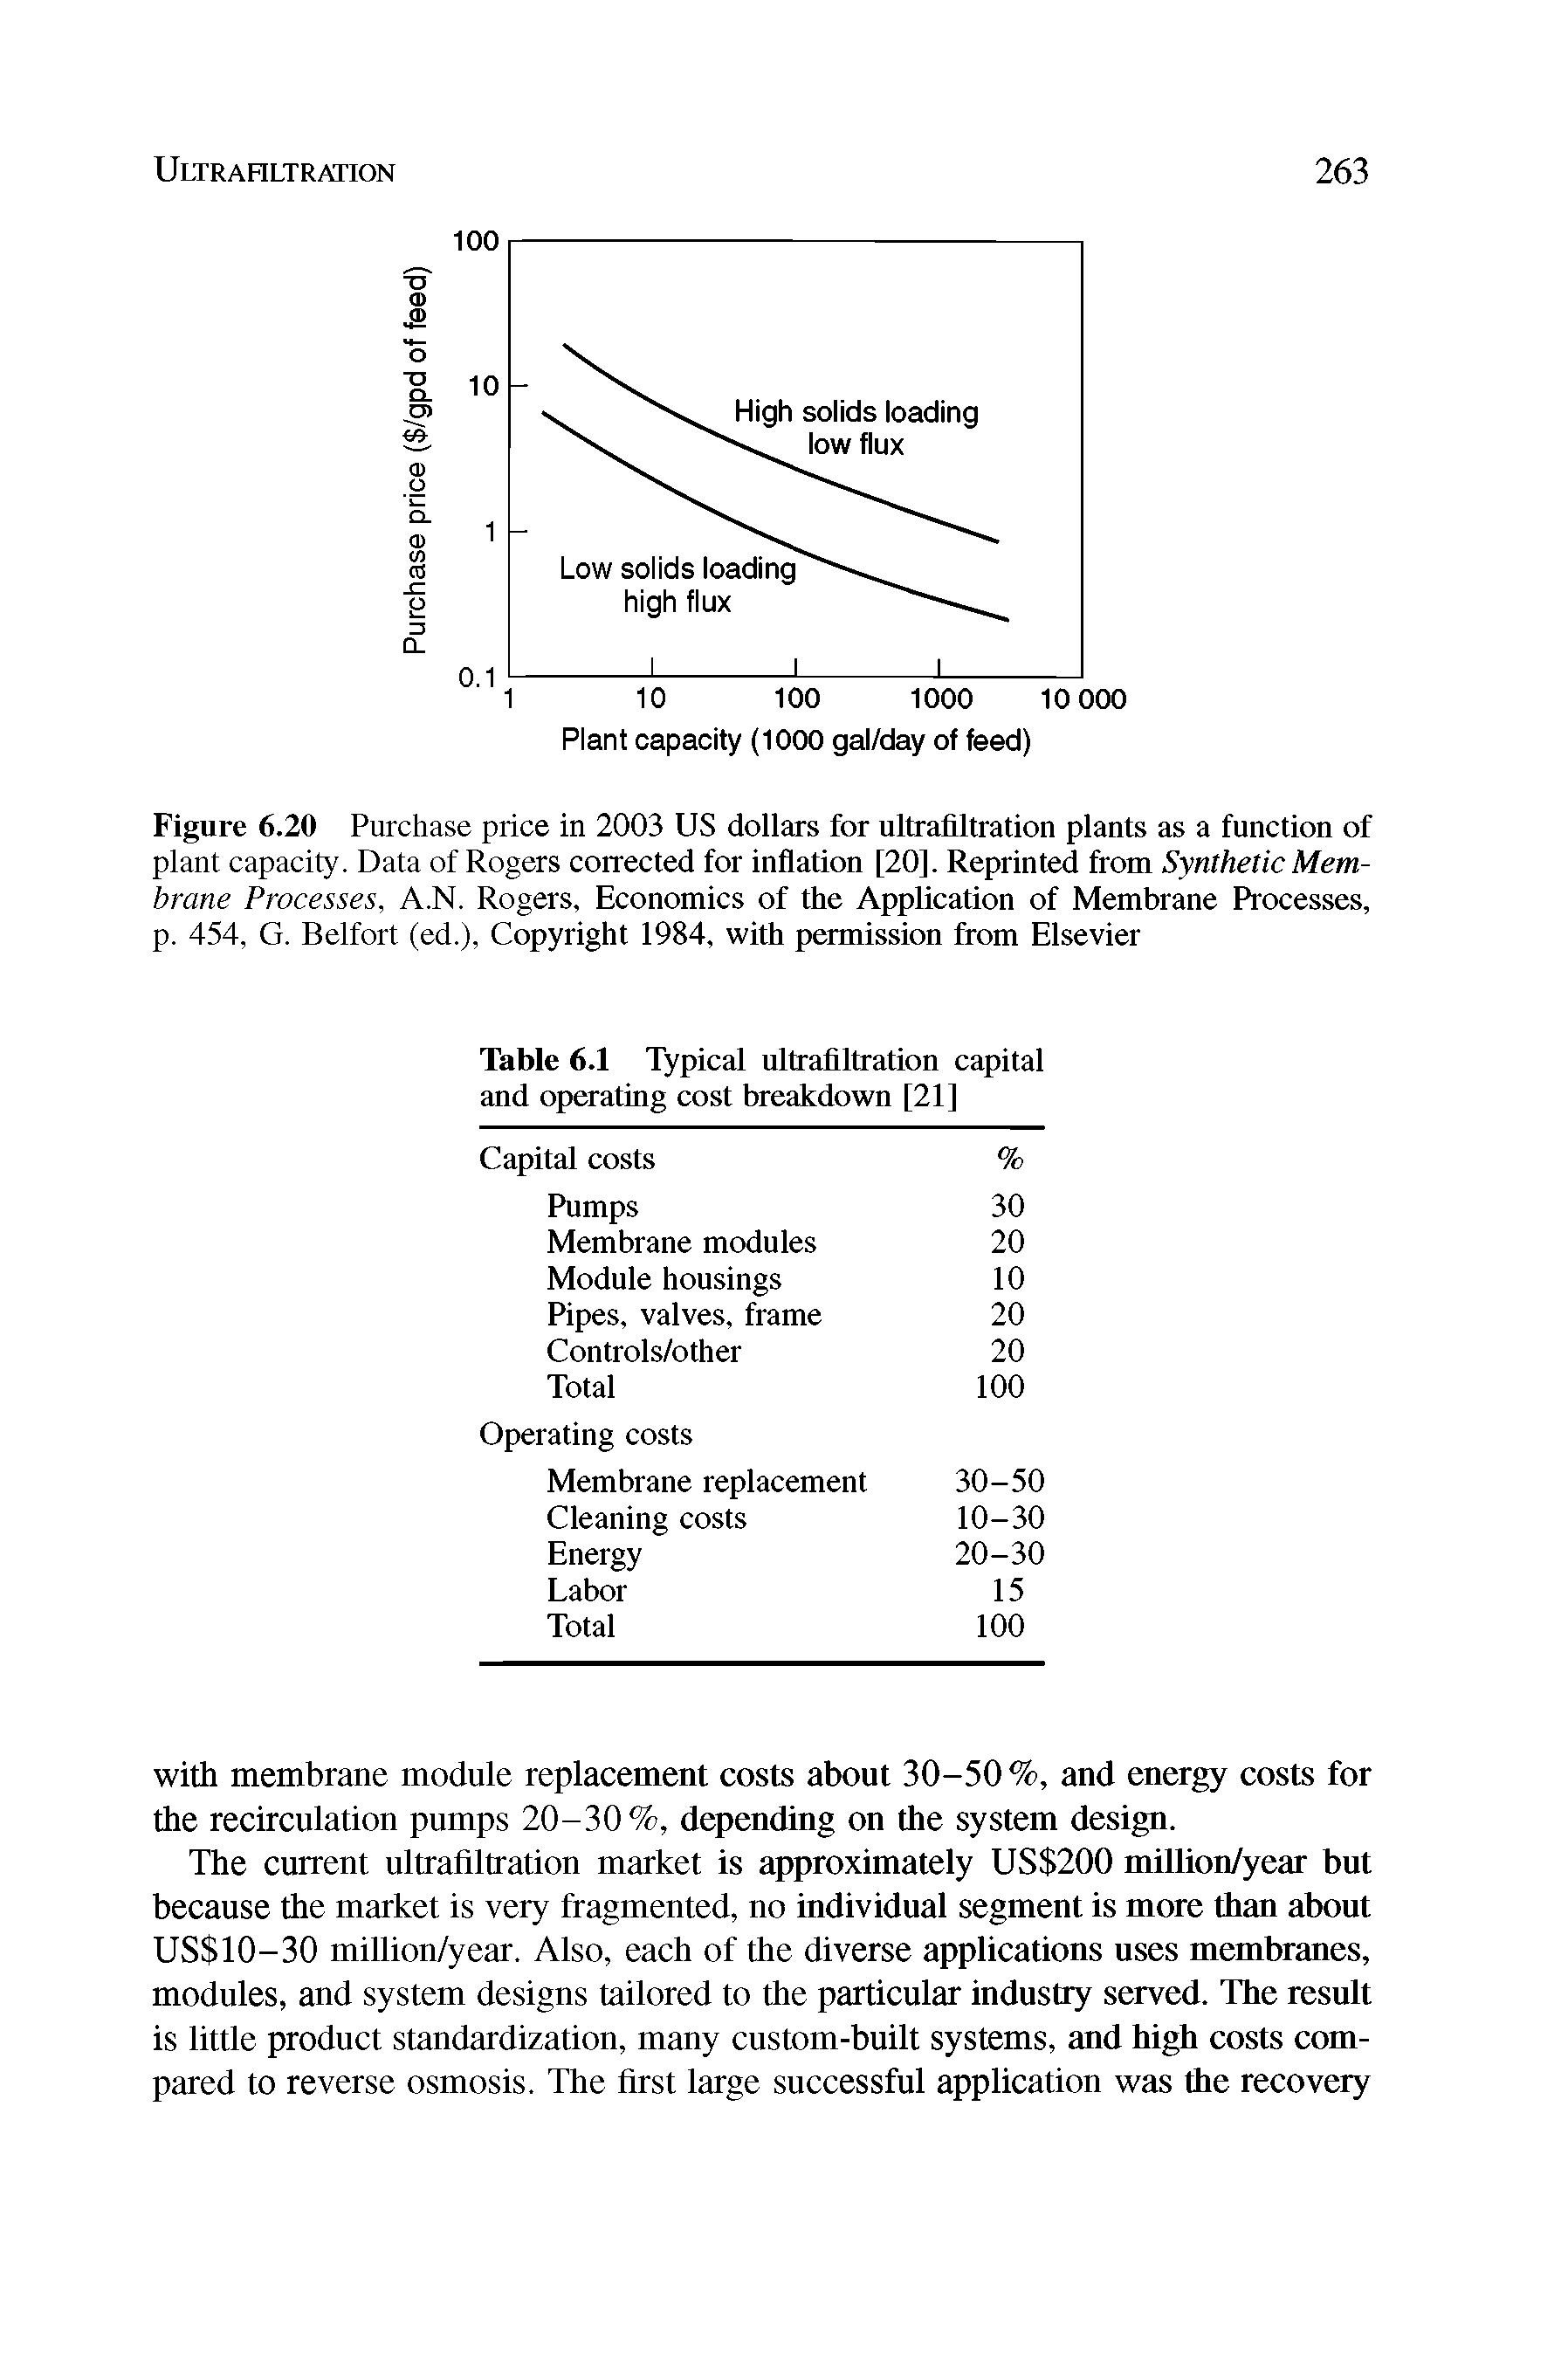 Figure 6.20 Purchase price in 2003 US dollars for ultrafiltration plants as a function of plant capacity. Data of Rogers corrected for inflation [20]. Reprinted from Synthetic Membrane Processes, A.N. Rogers, Economics of the Application of Membrane Processes, p. 454, G. Belfort (ed.), Copyright 1984, with permission from Elsevier...